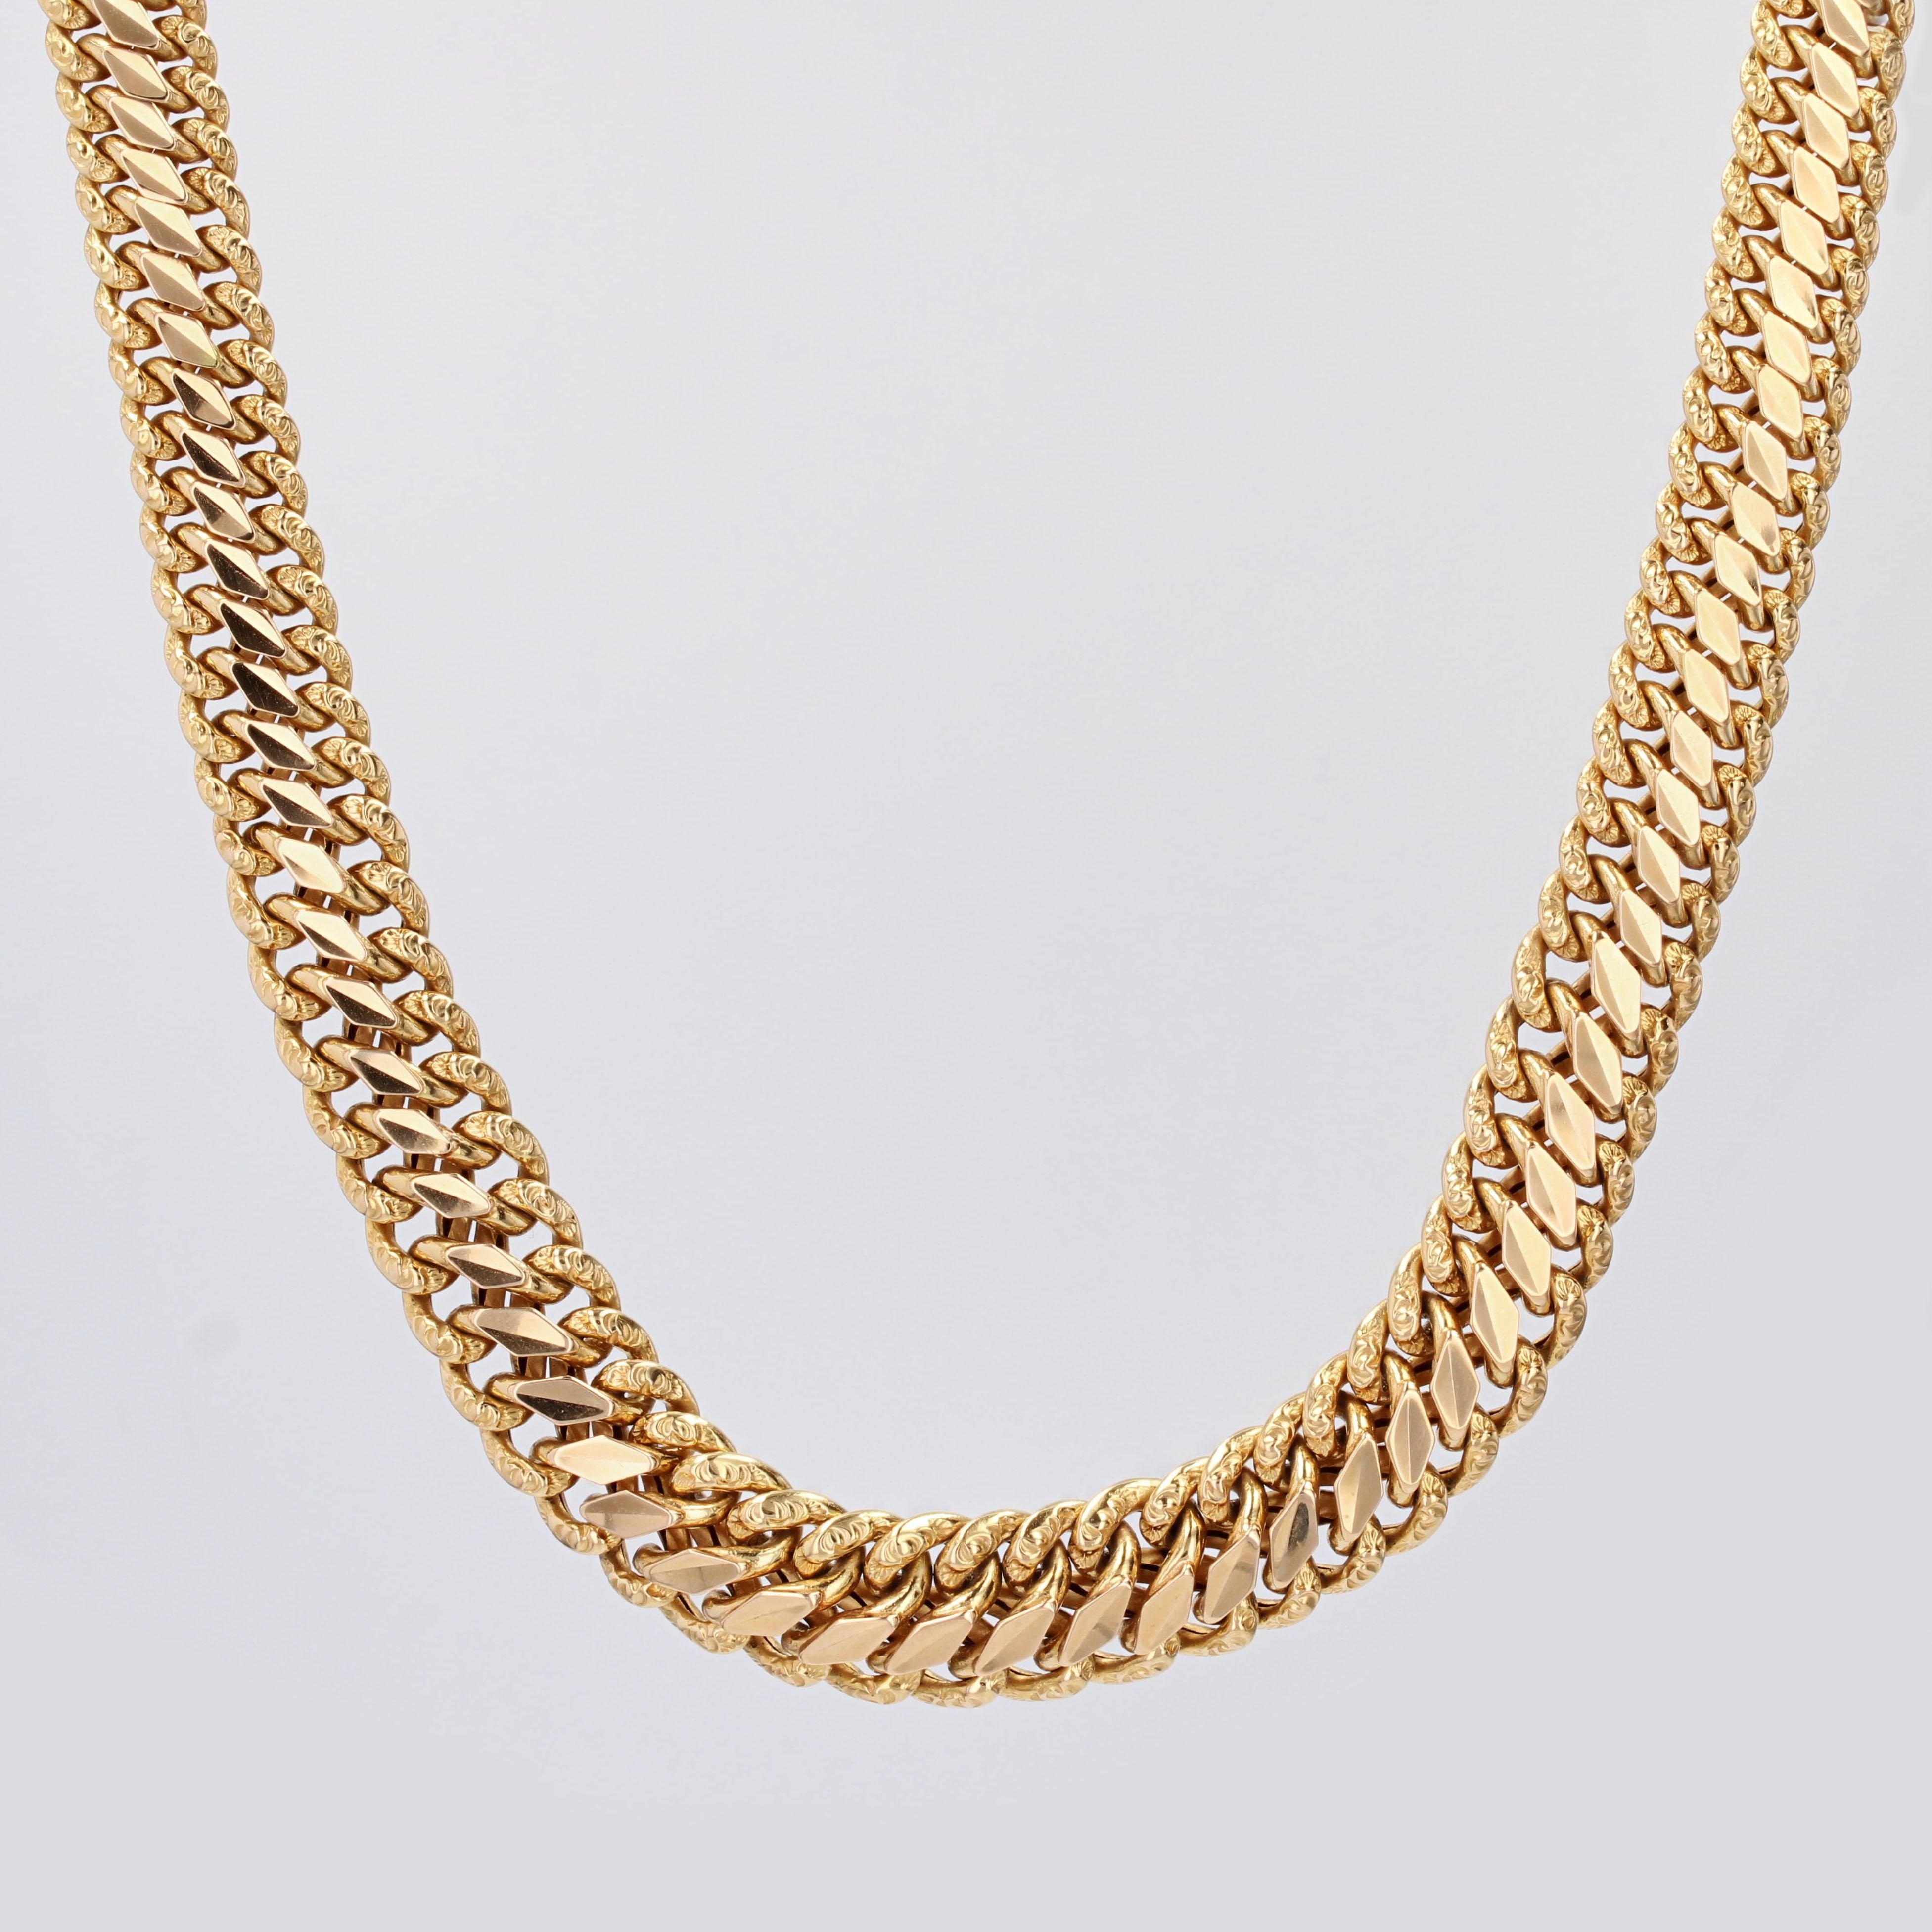 French 1960s 18 Karat Yellow Gold Retro Curb Chain Necklace For Sale 9